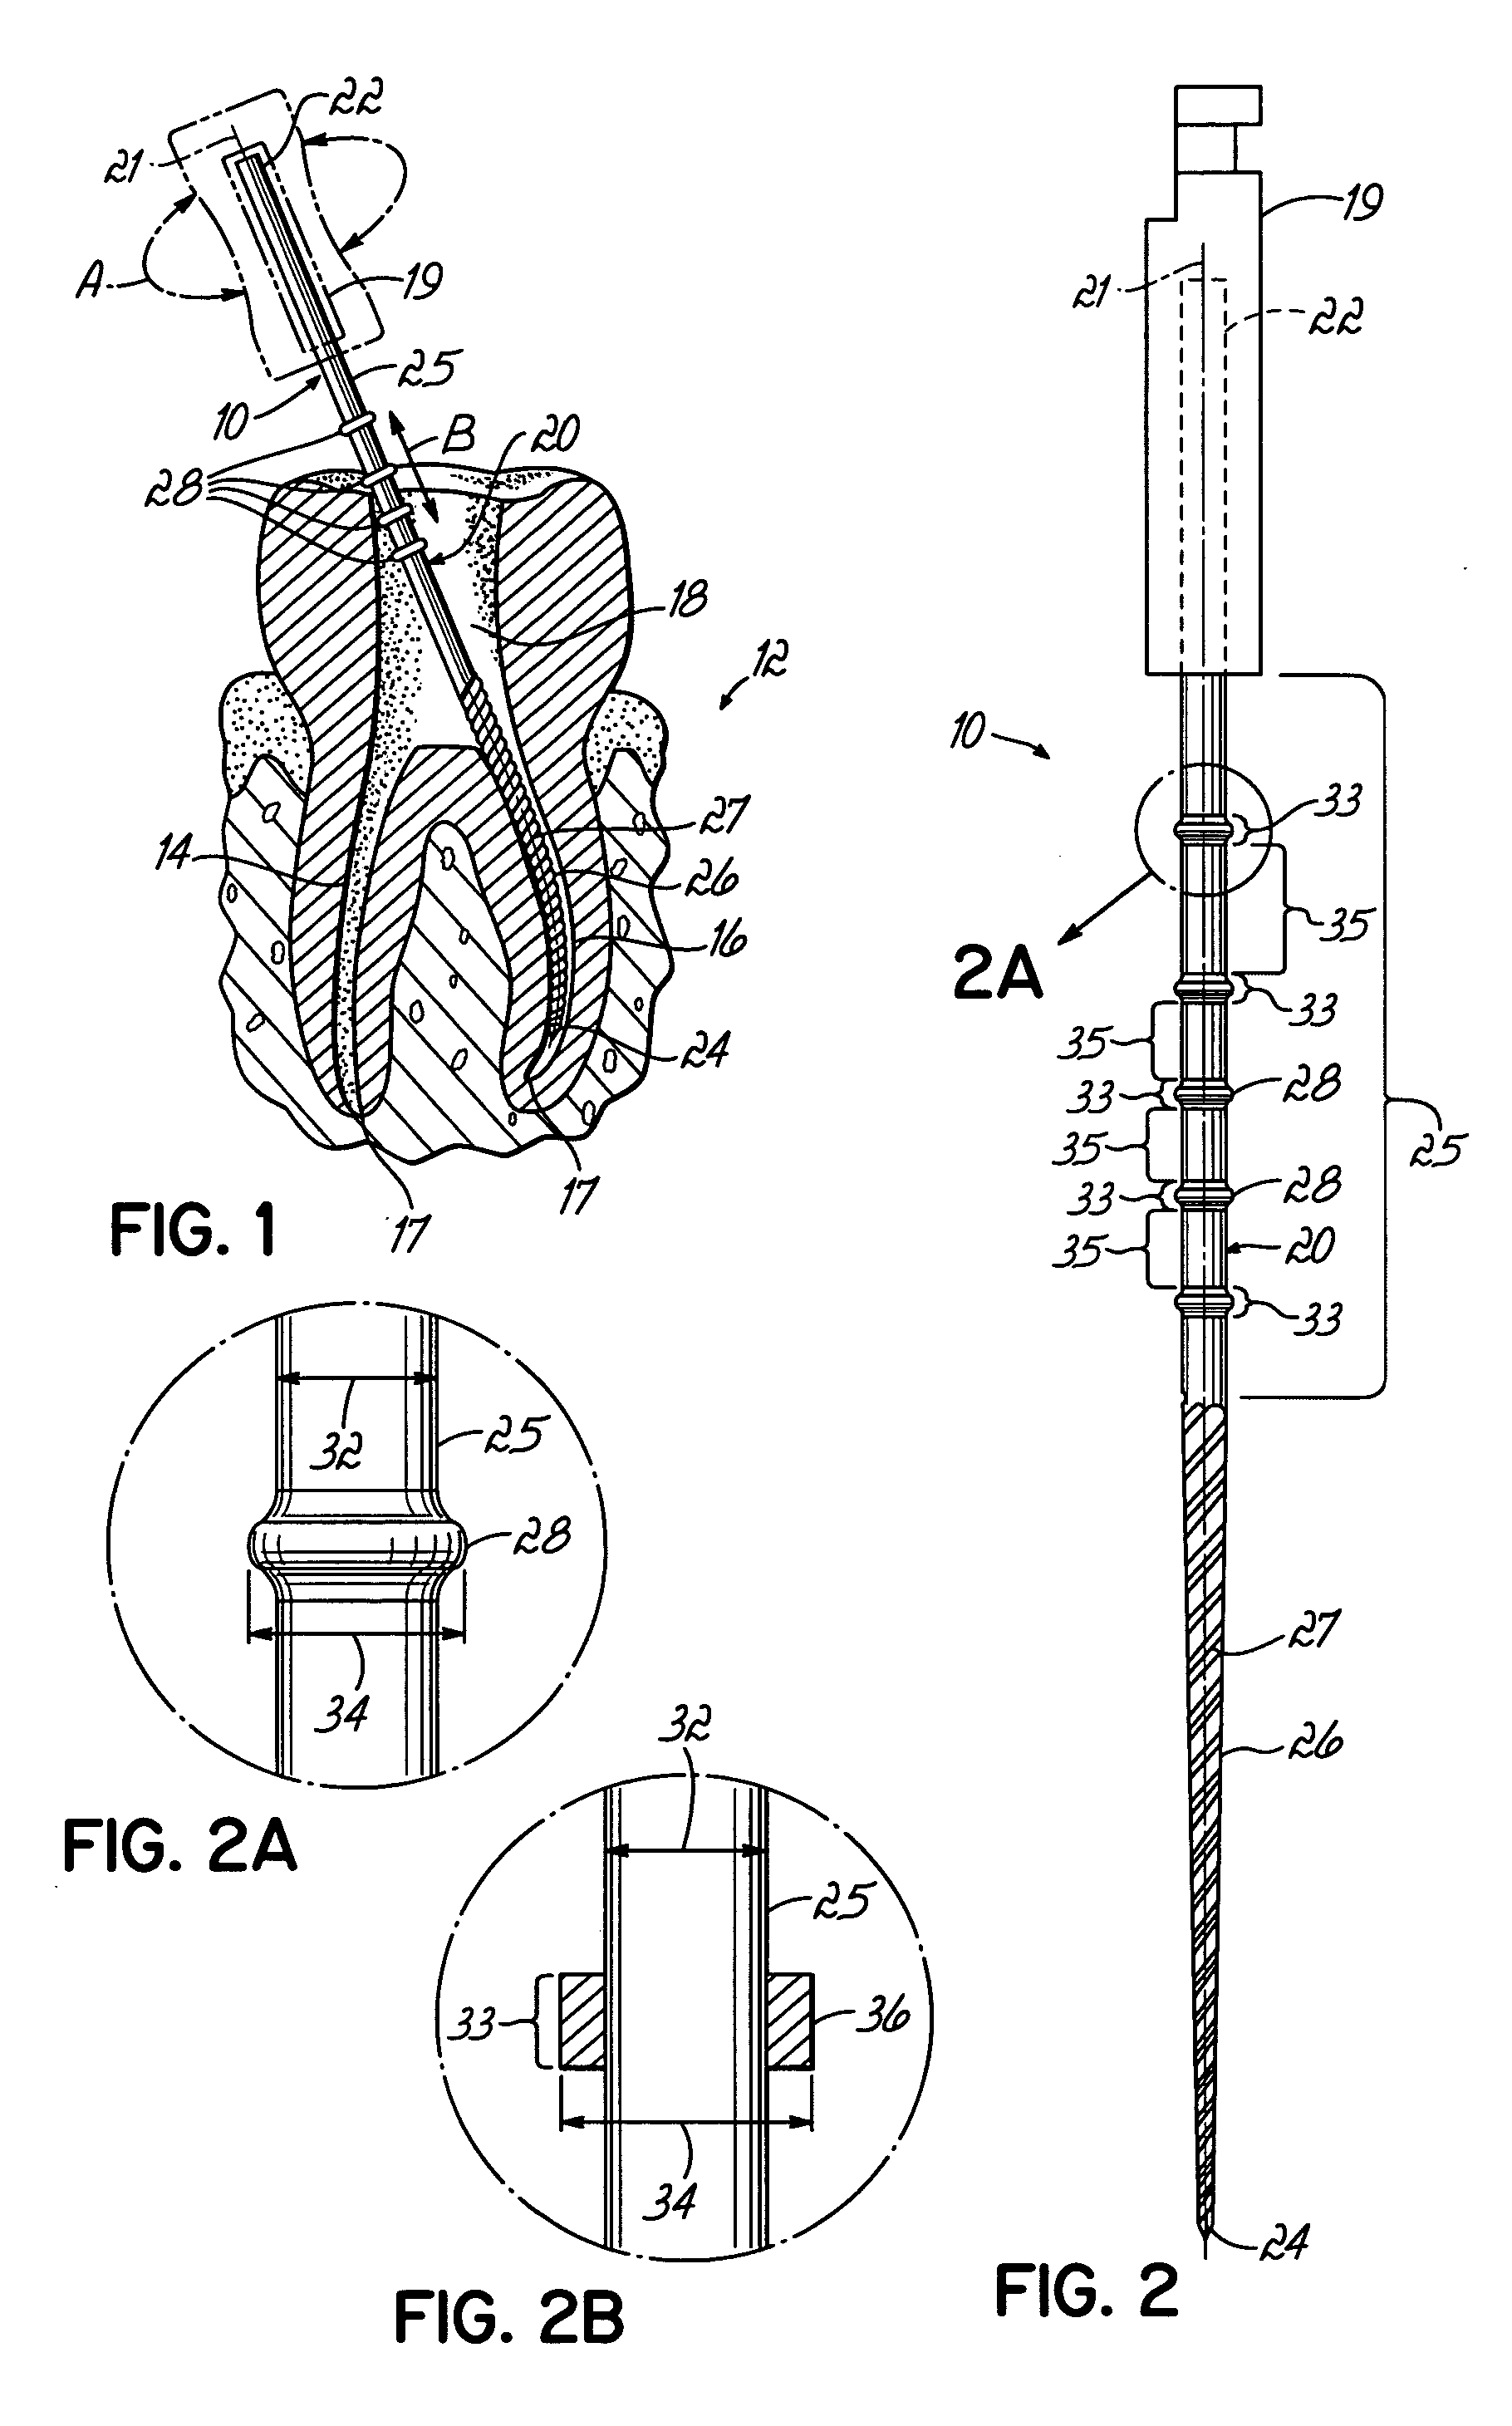 Endodontic instrument with depth markers